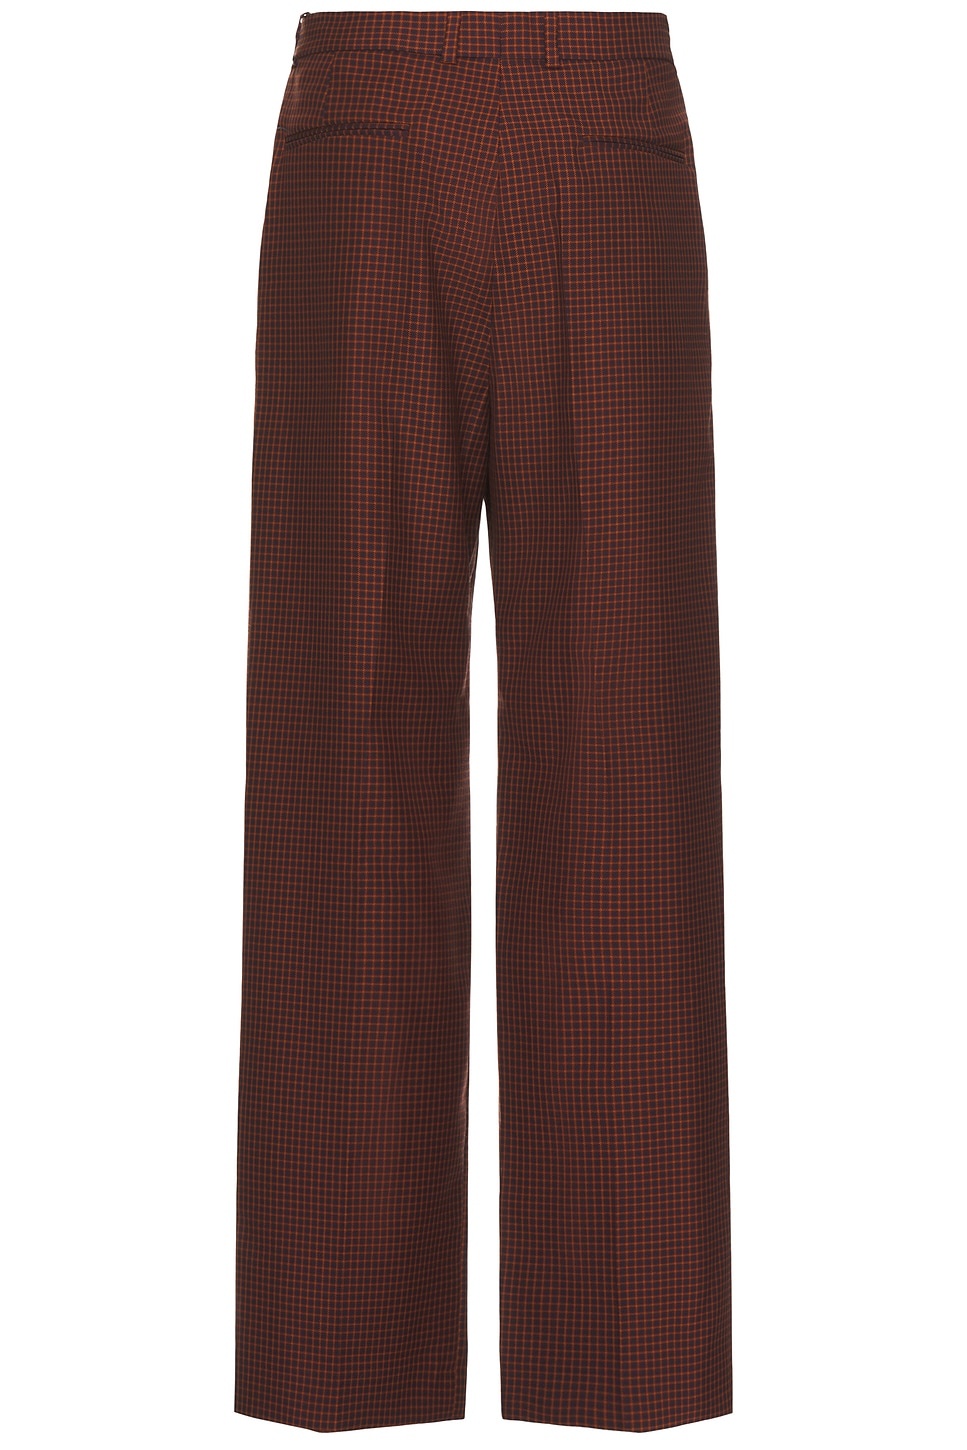 Classic Trousers With Pleat - 2